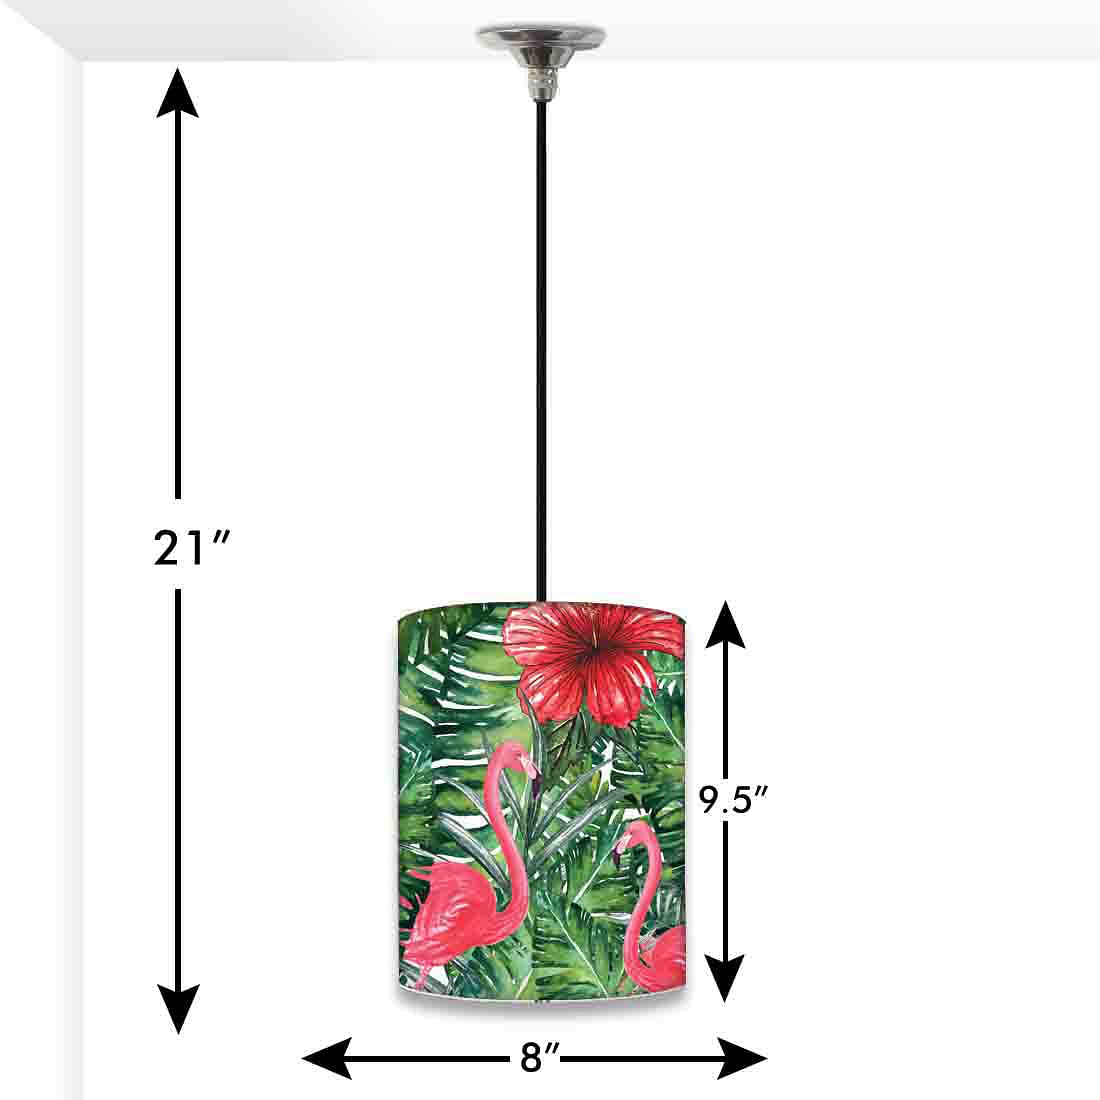 Hanging Lamps For Dining Room Nutcase